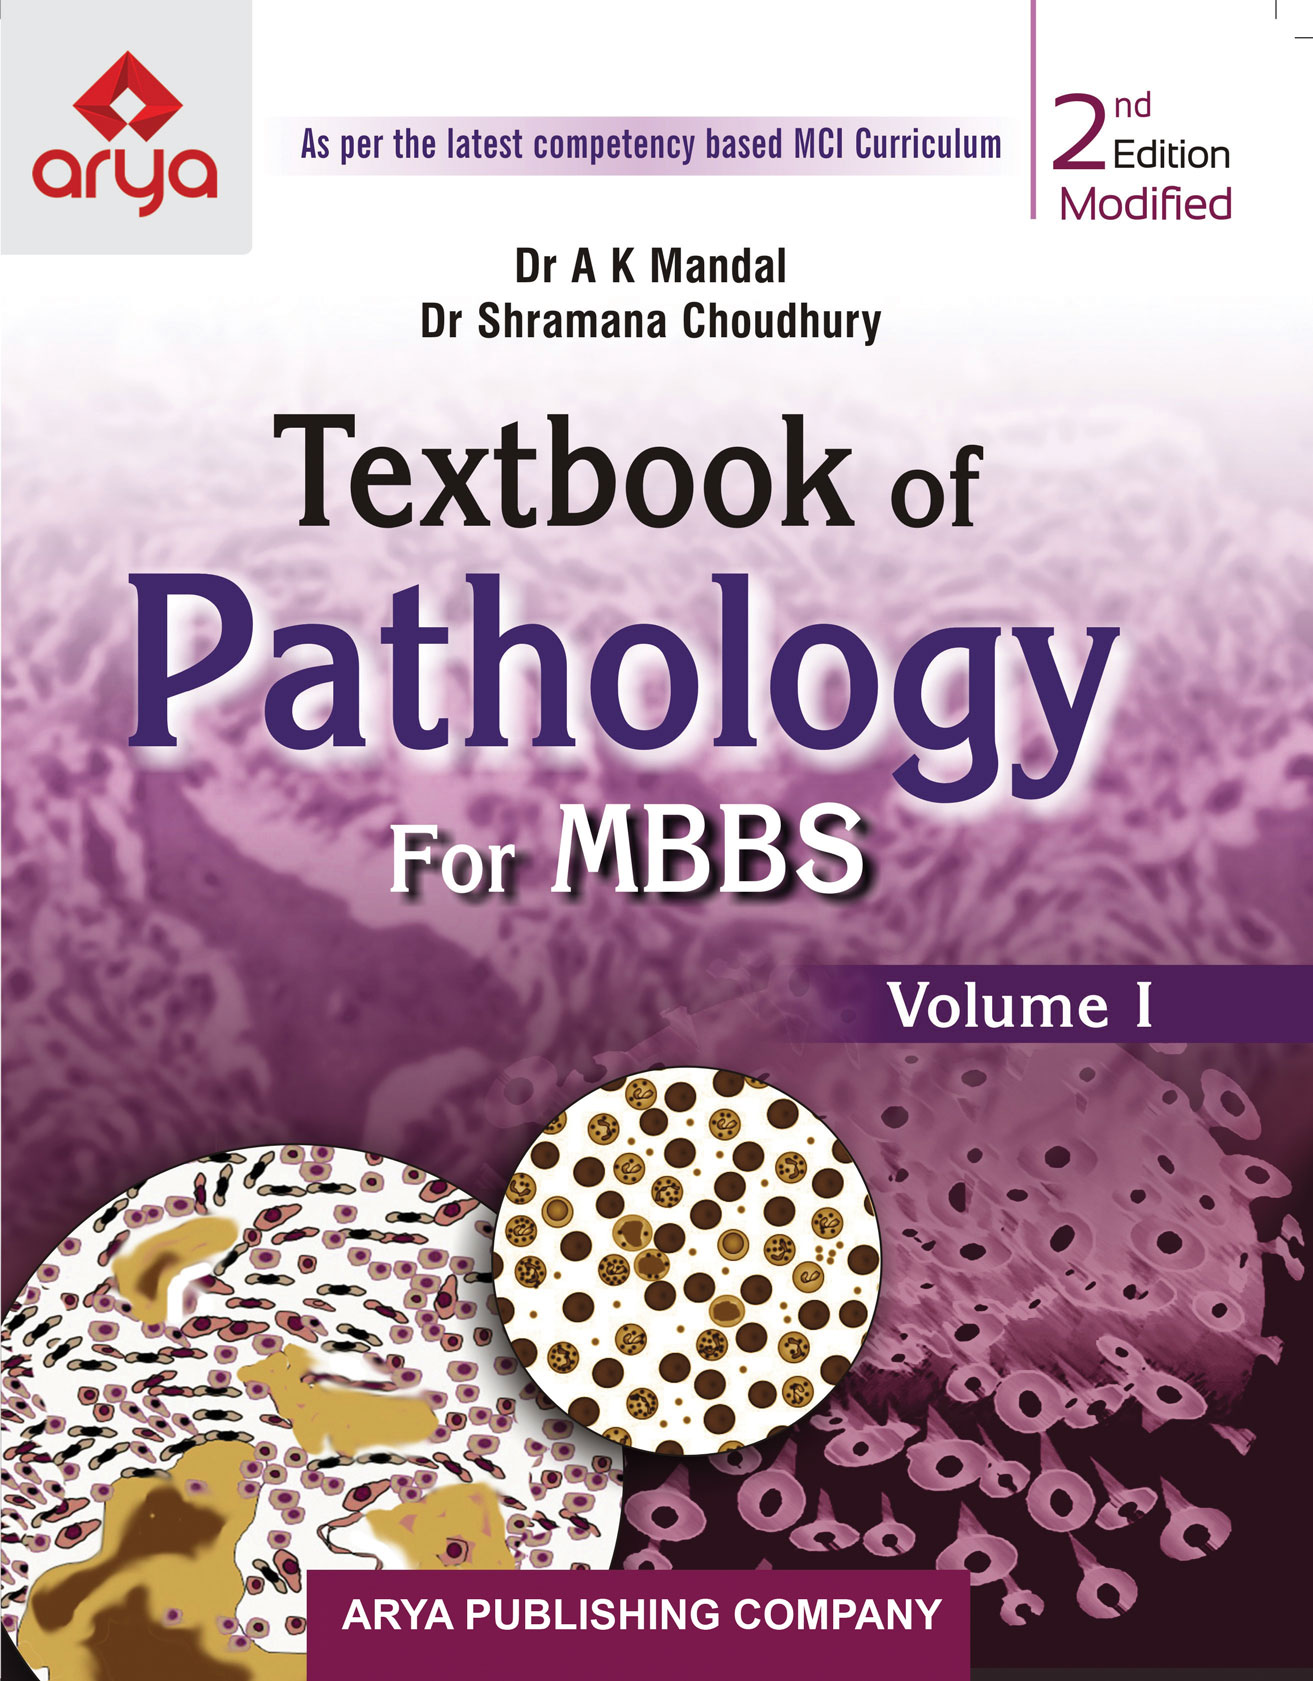 Textbook of Pathology for MBBS (Volumes I and II)  (Modified)